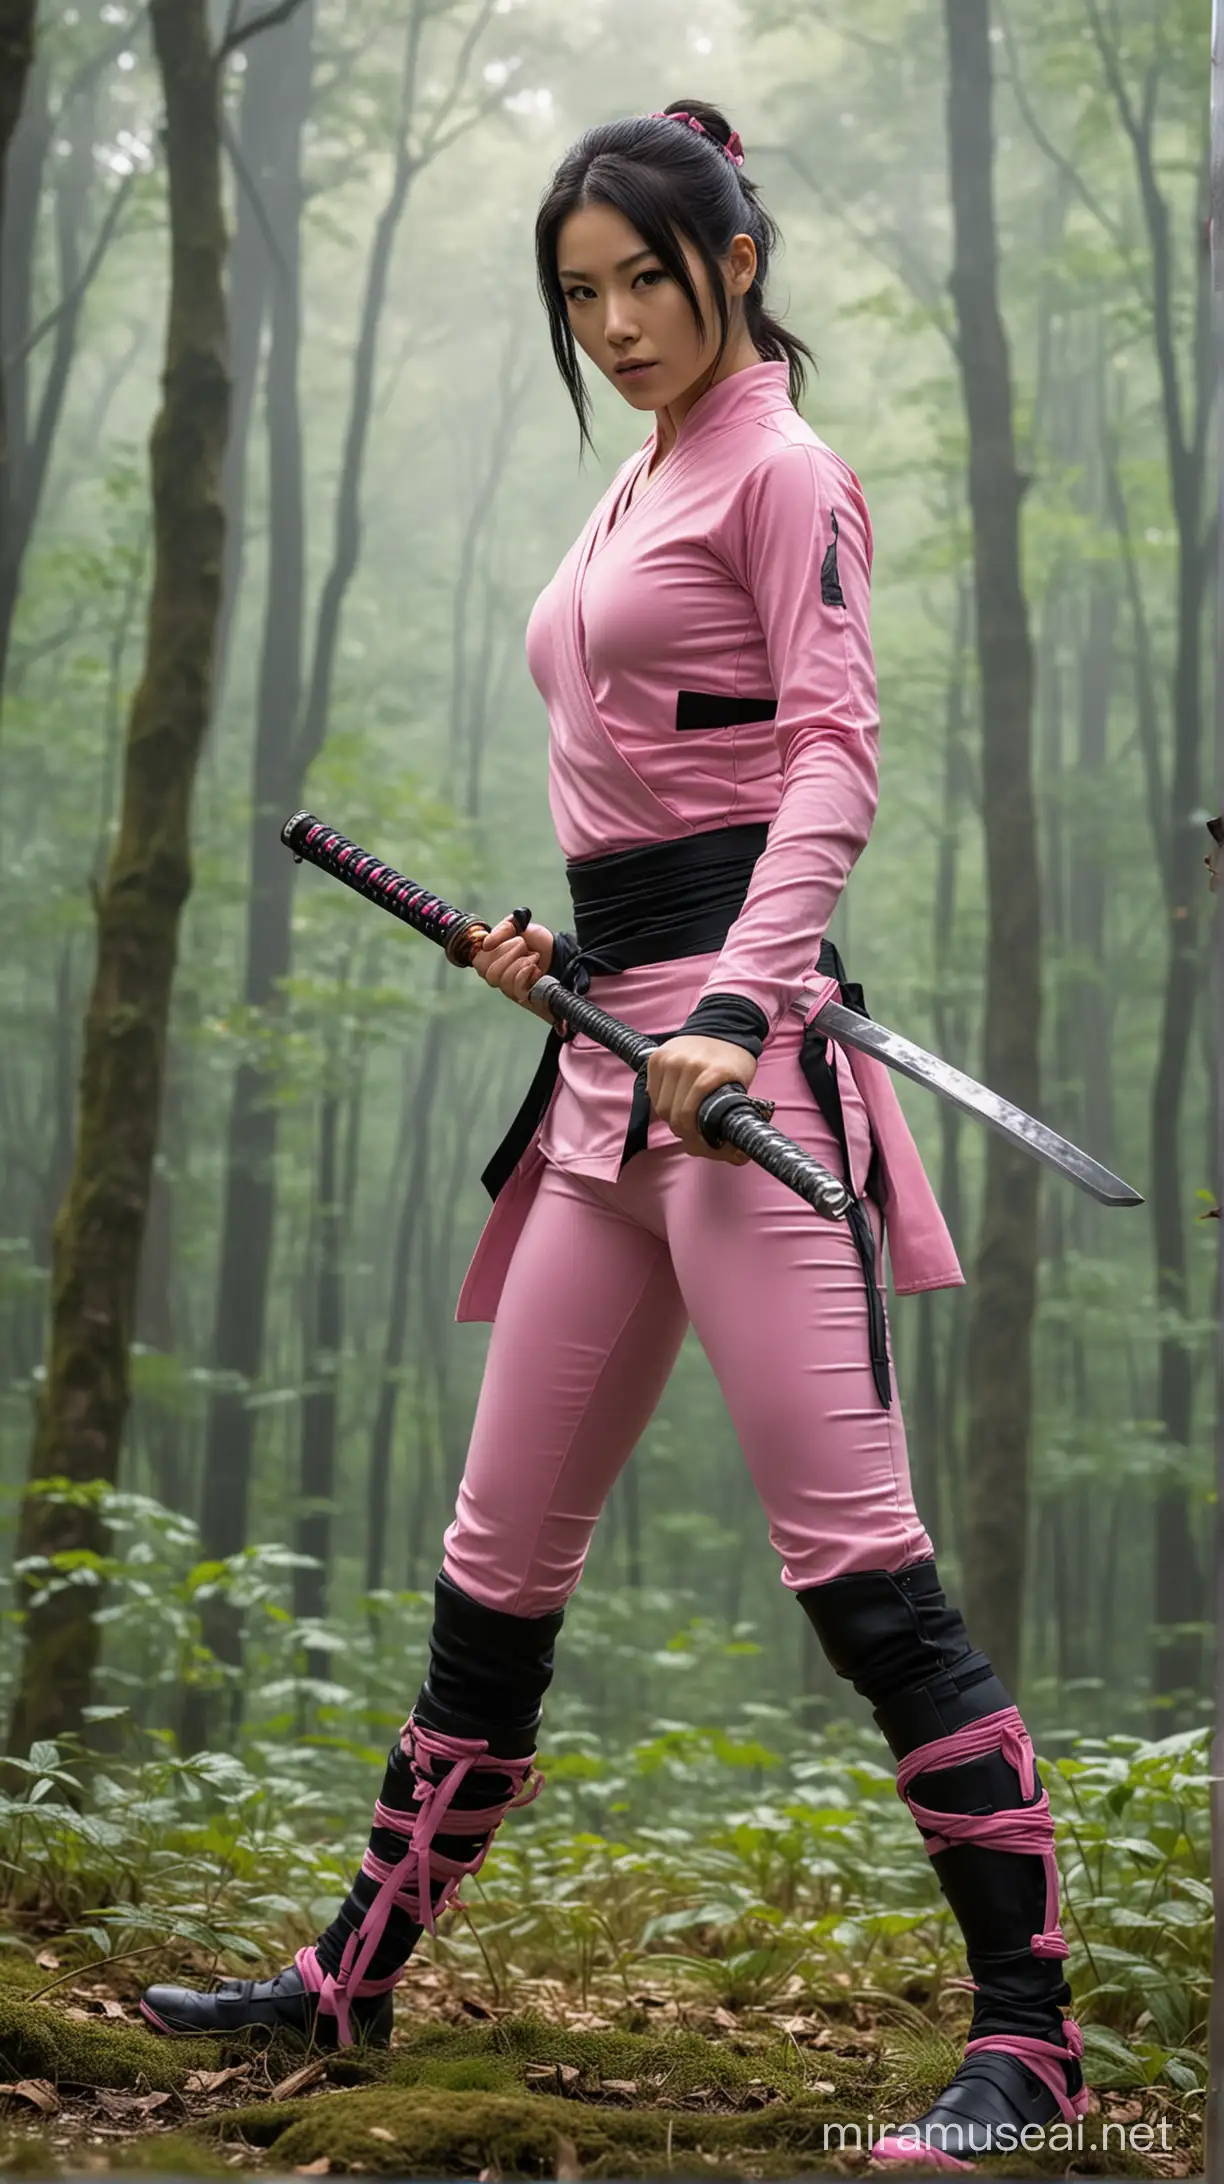 highest definition photography, fictional figure of female ninja, beautiful, sexy, wearing pink full tight ninja costume, katana sword, green forest, dense, quiet, cloudy weather as background